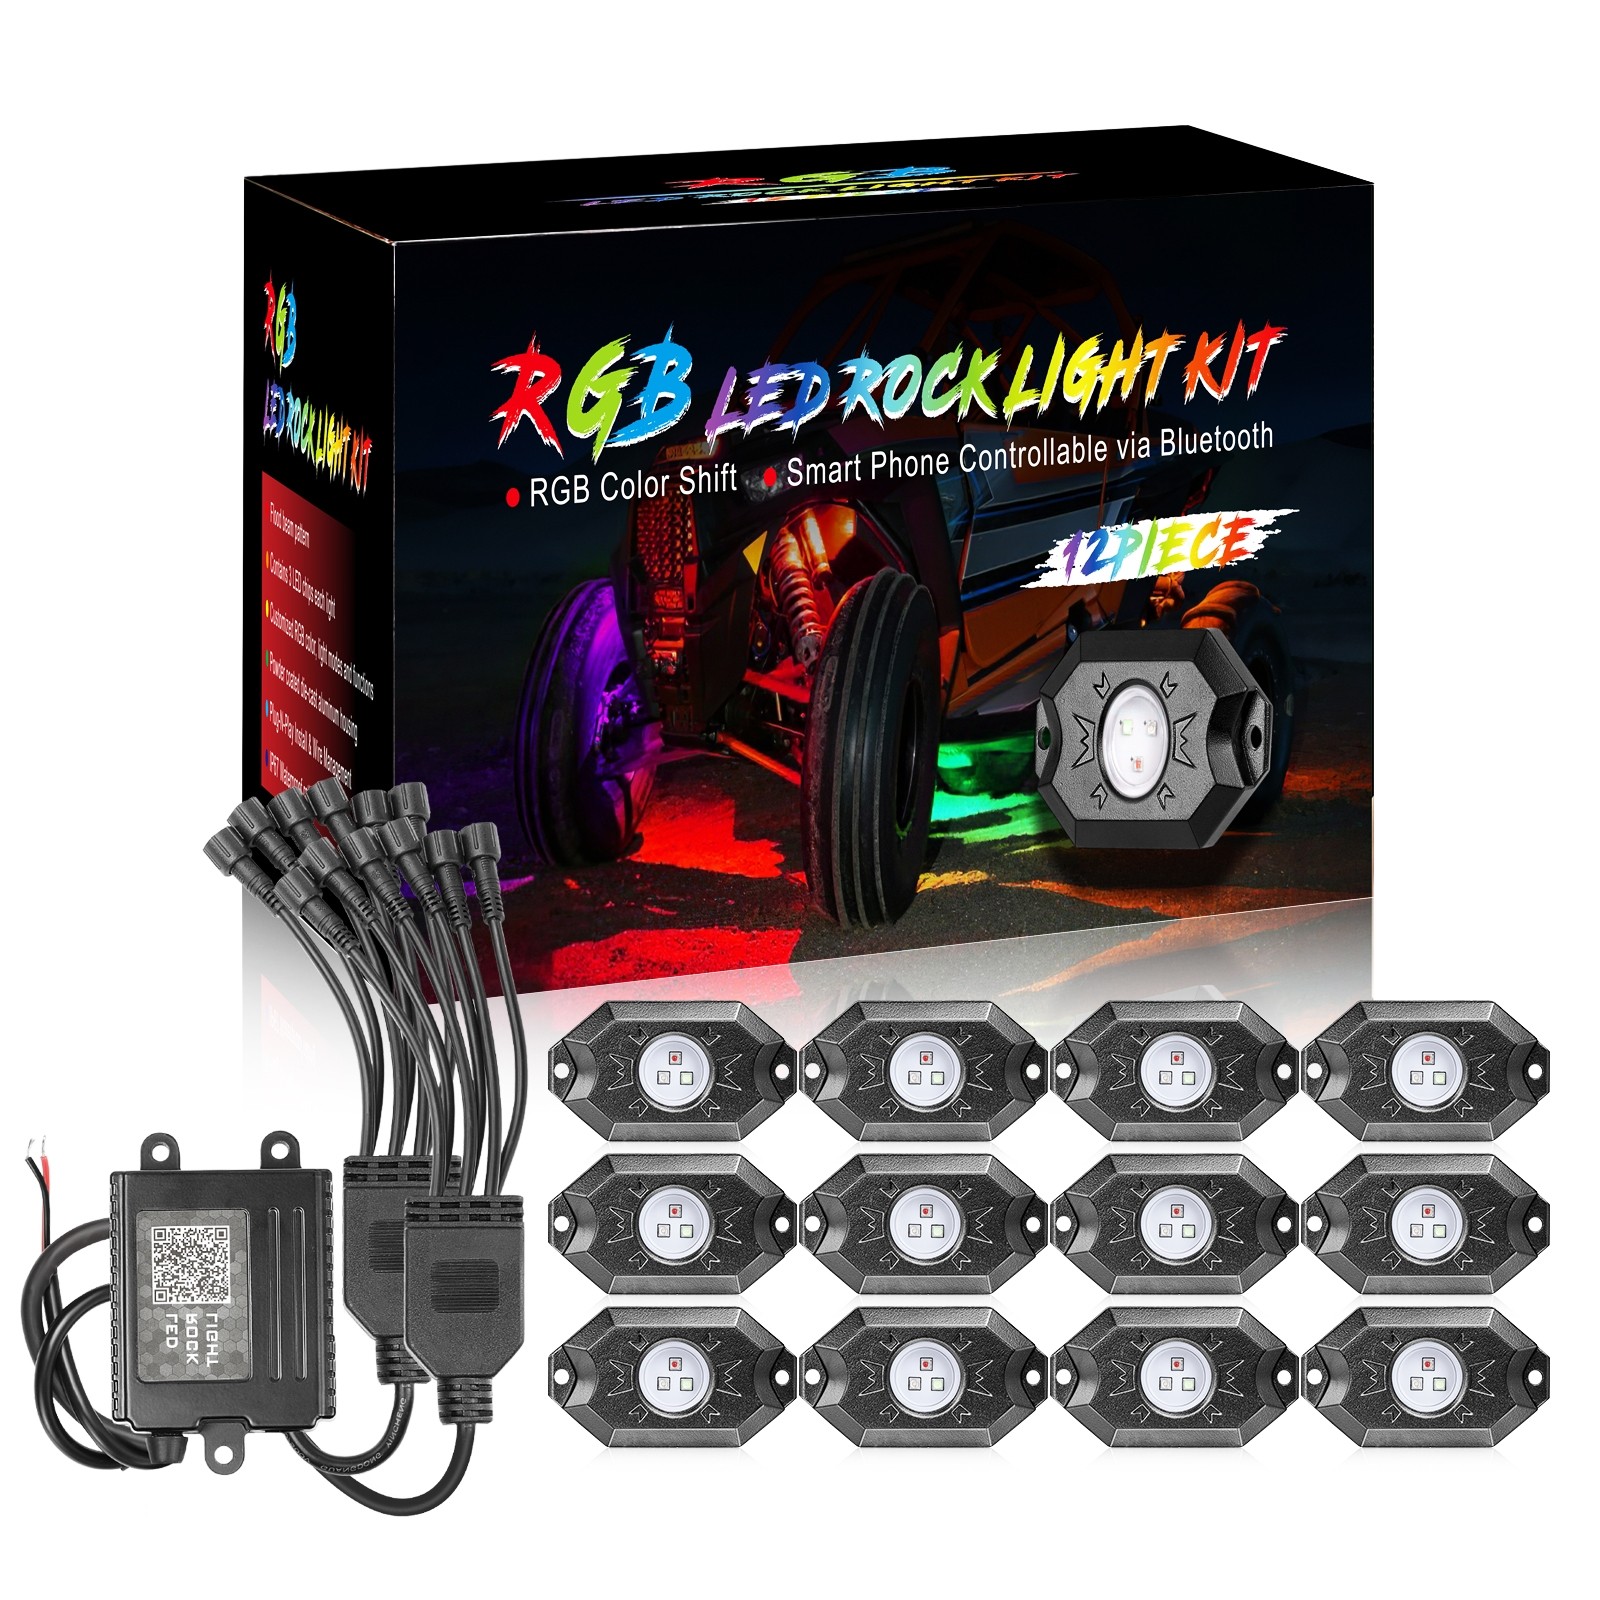 OFFROADTOWN RGB Rock Light Kits, RGB LED Rock Lights with 12 pods Lights Multicolor Neon Trail Rig Lights Underglow Wheel Well Rock Lights for UTV ATV SUV Off Road Truck Boat 